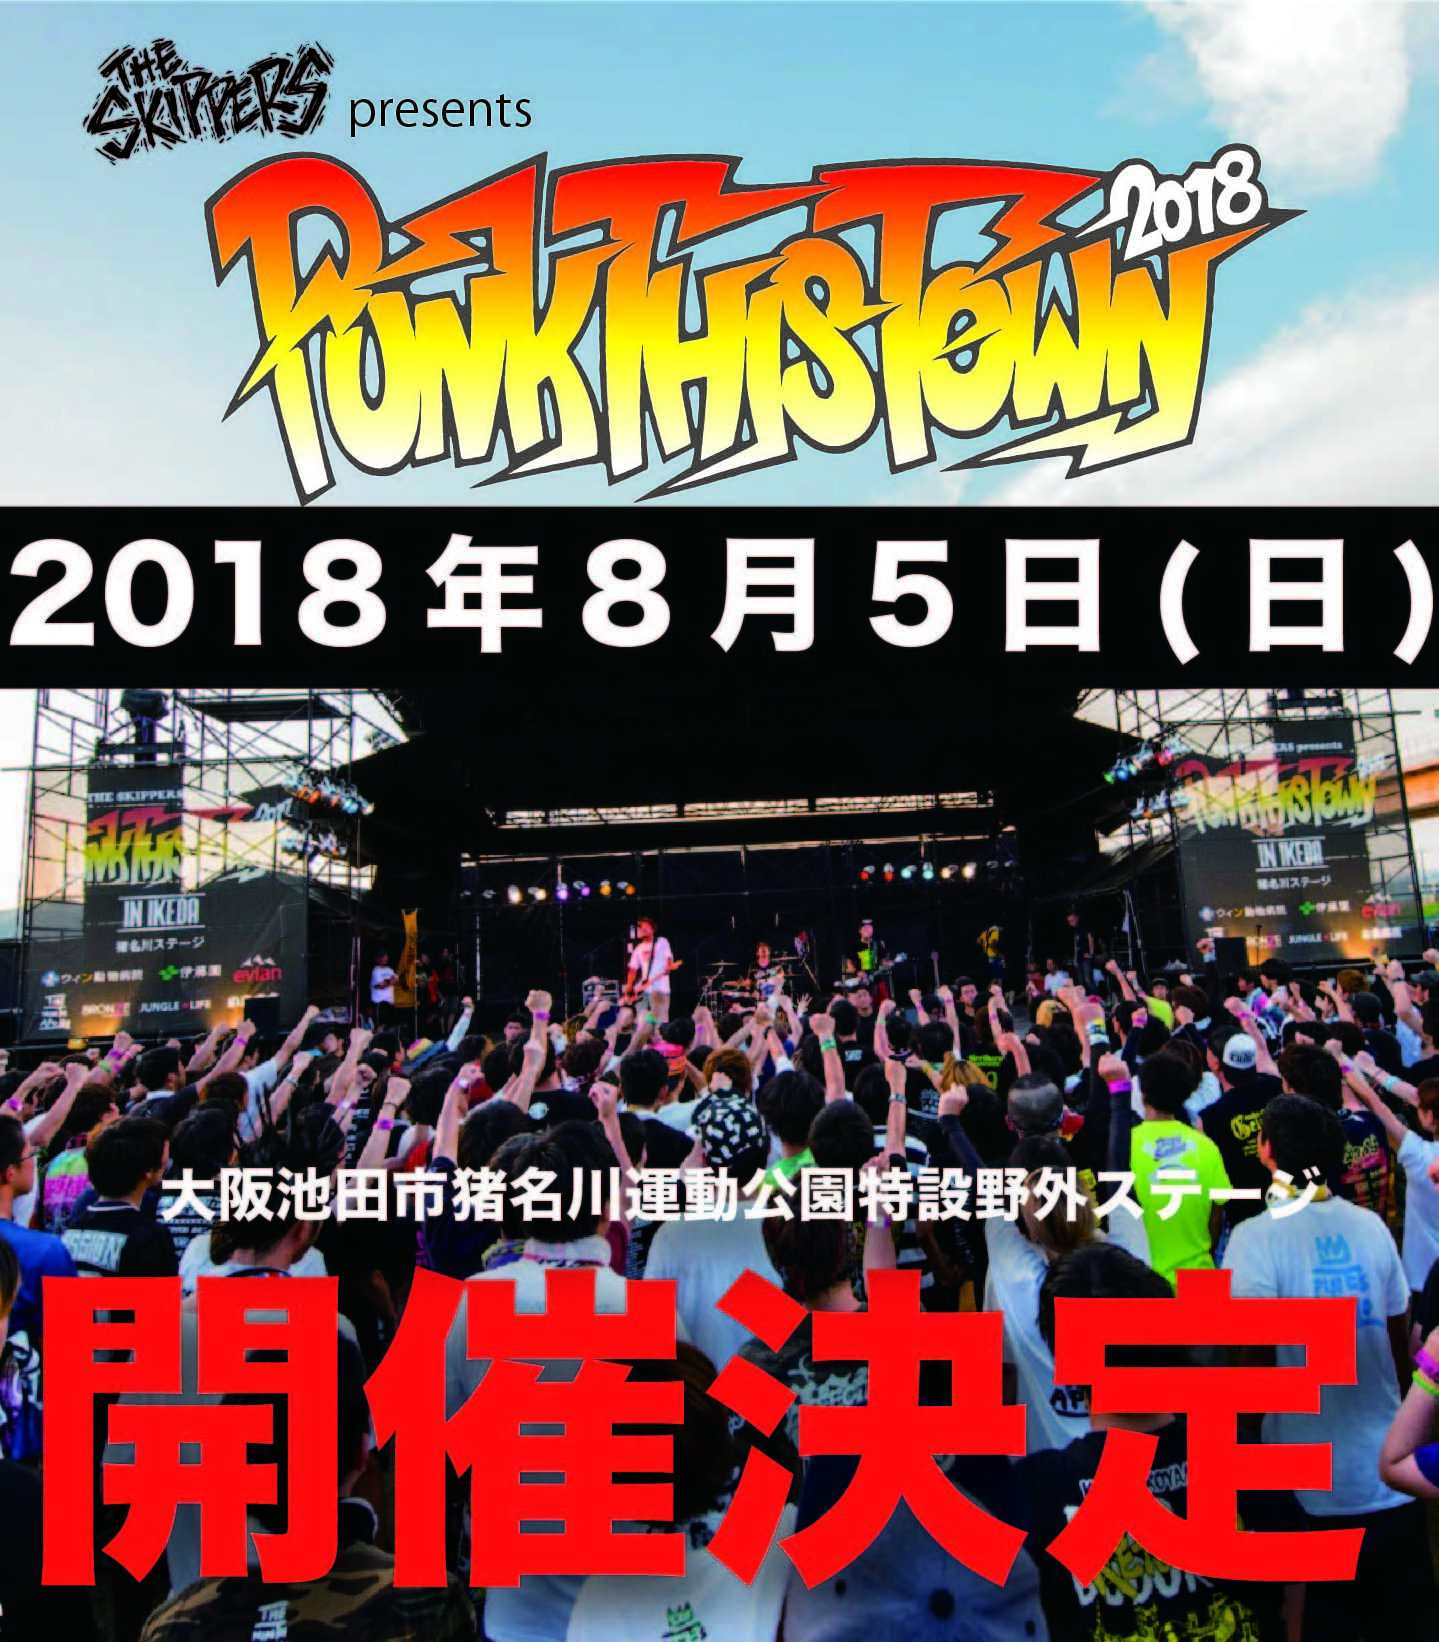 THE SKIPPERS presents PUNK THIS TOWN 2018 in IKEDA